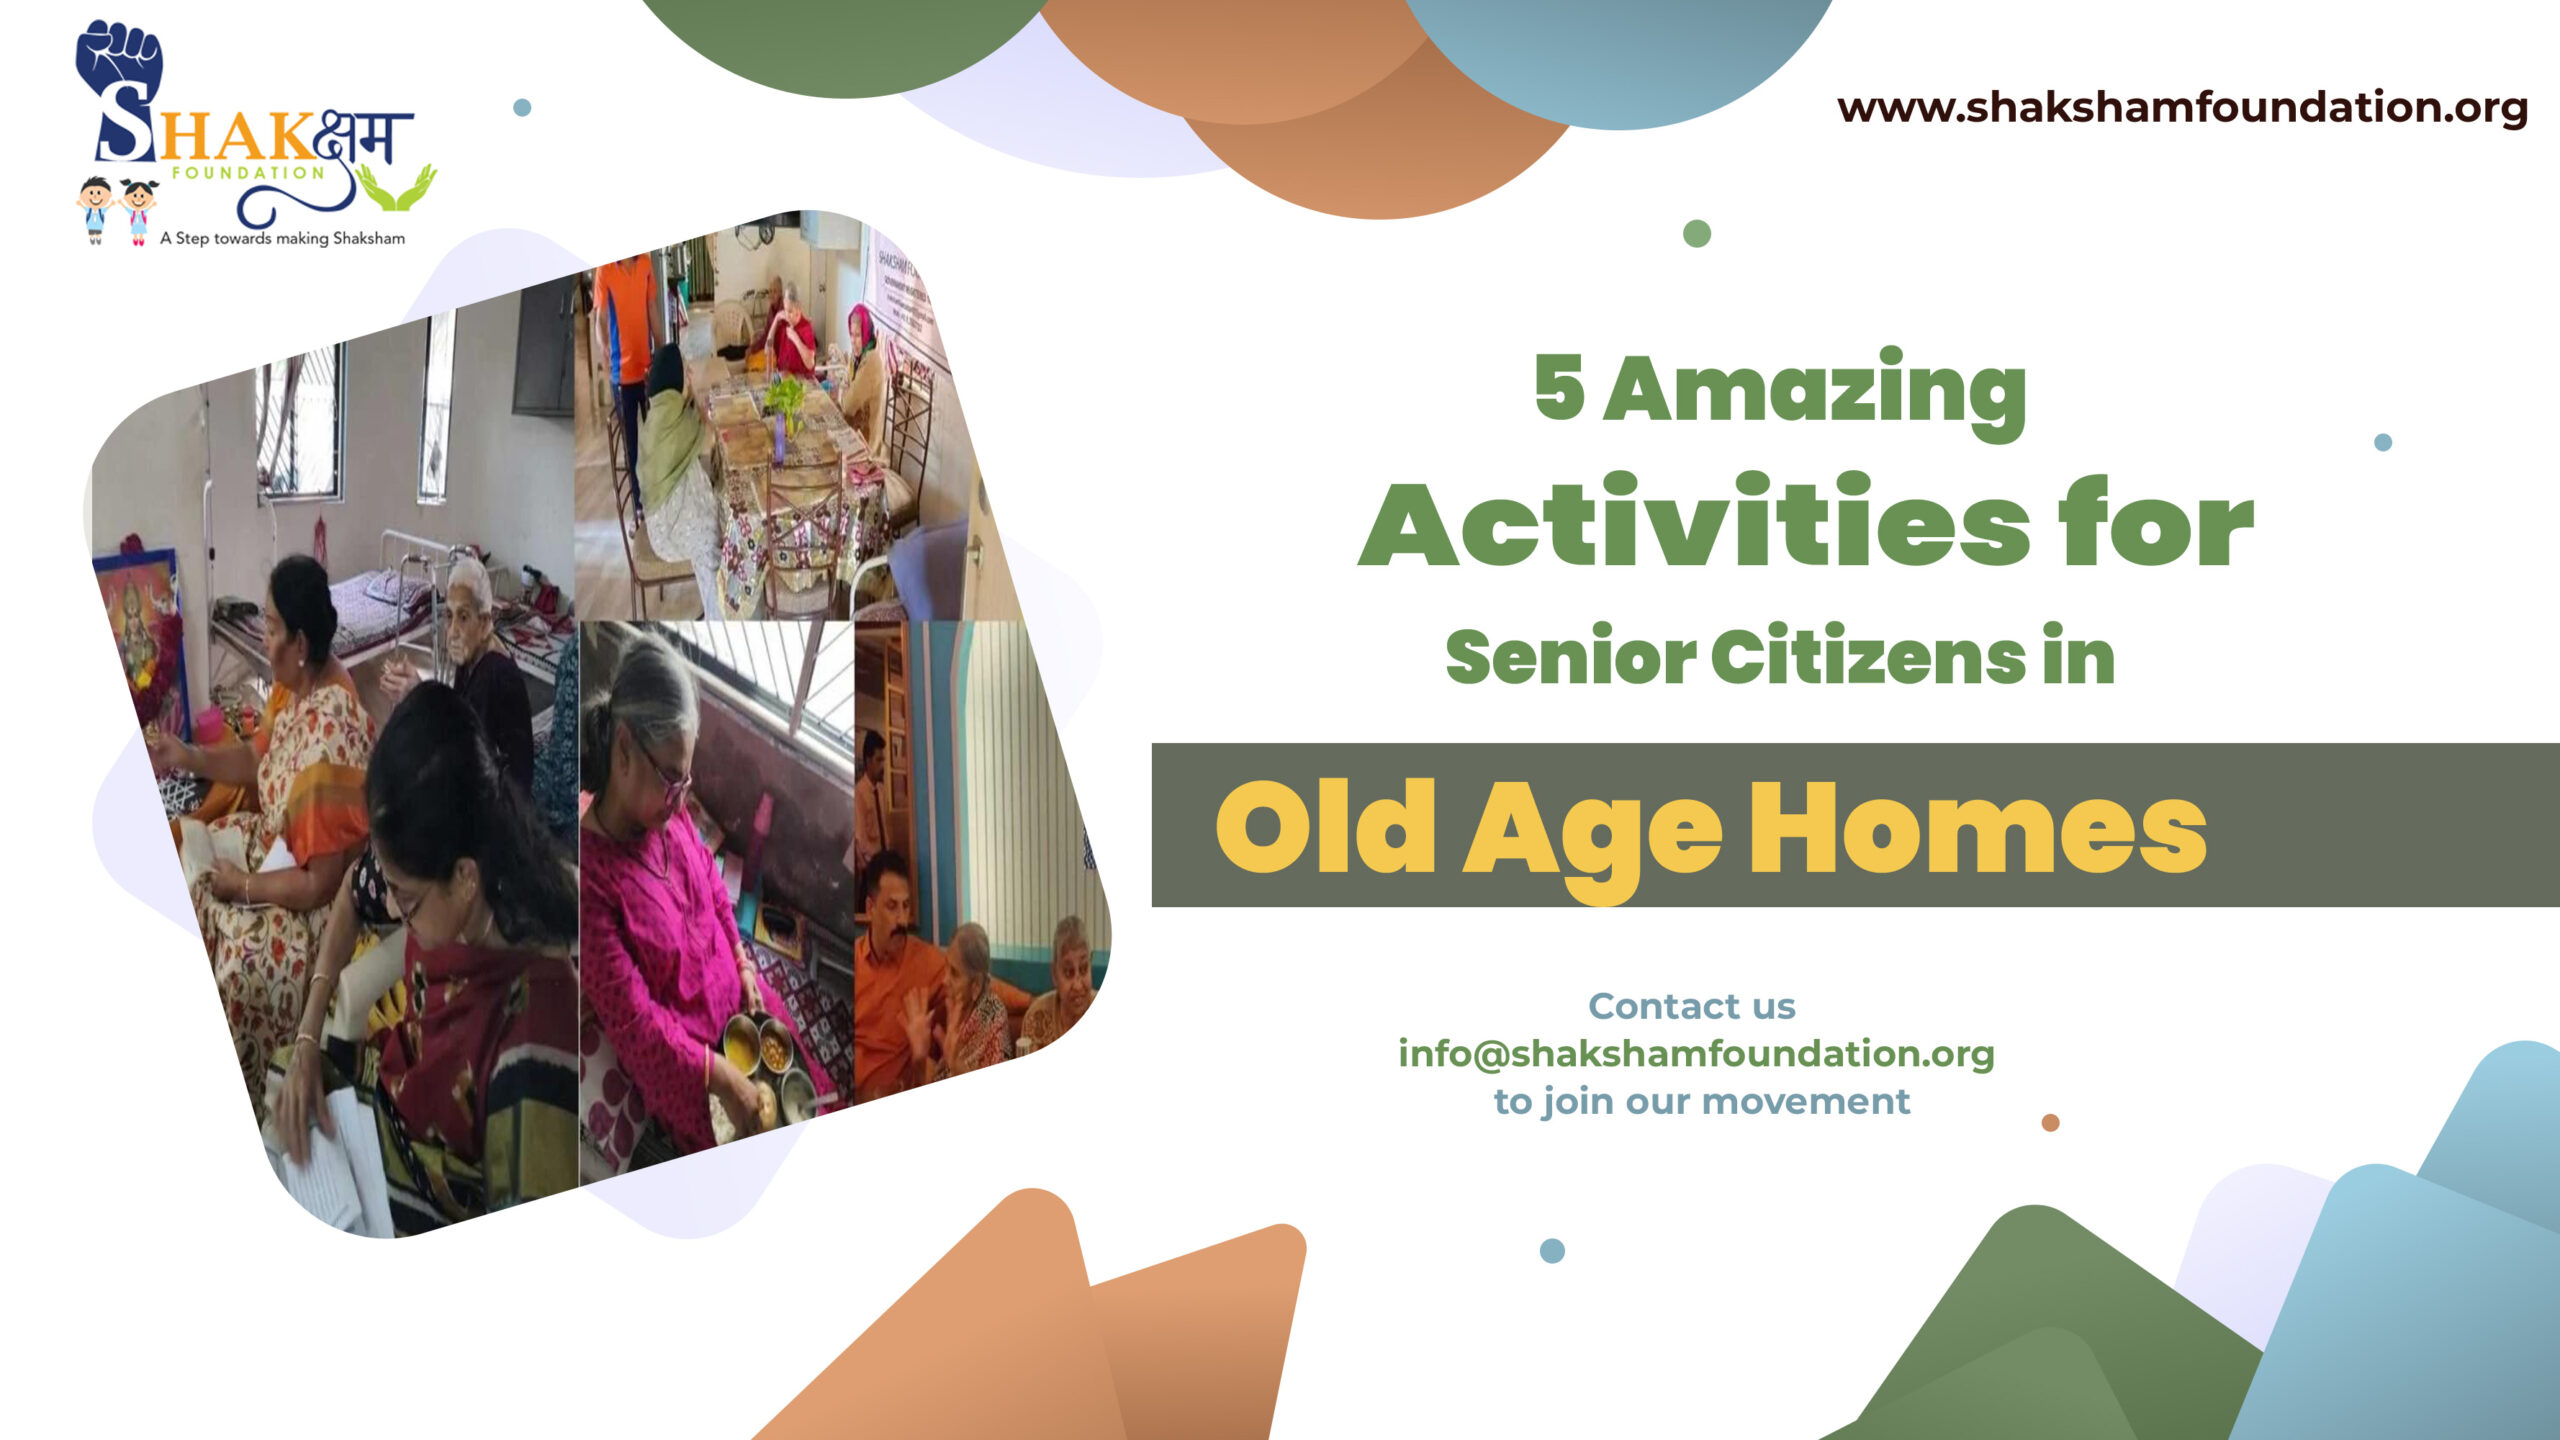 5 Amazing Activities for Senior Citizens in Old Age Homes